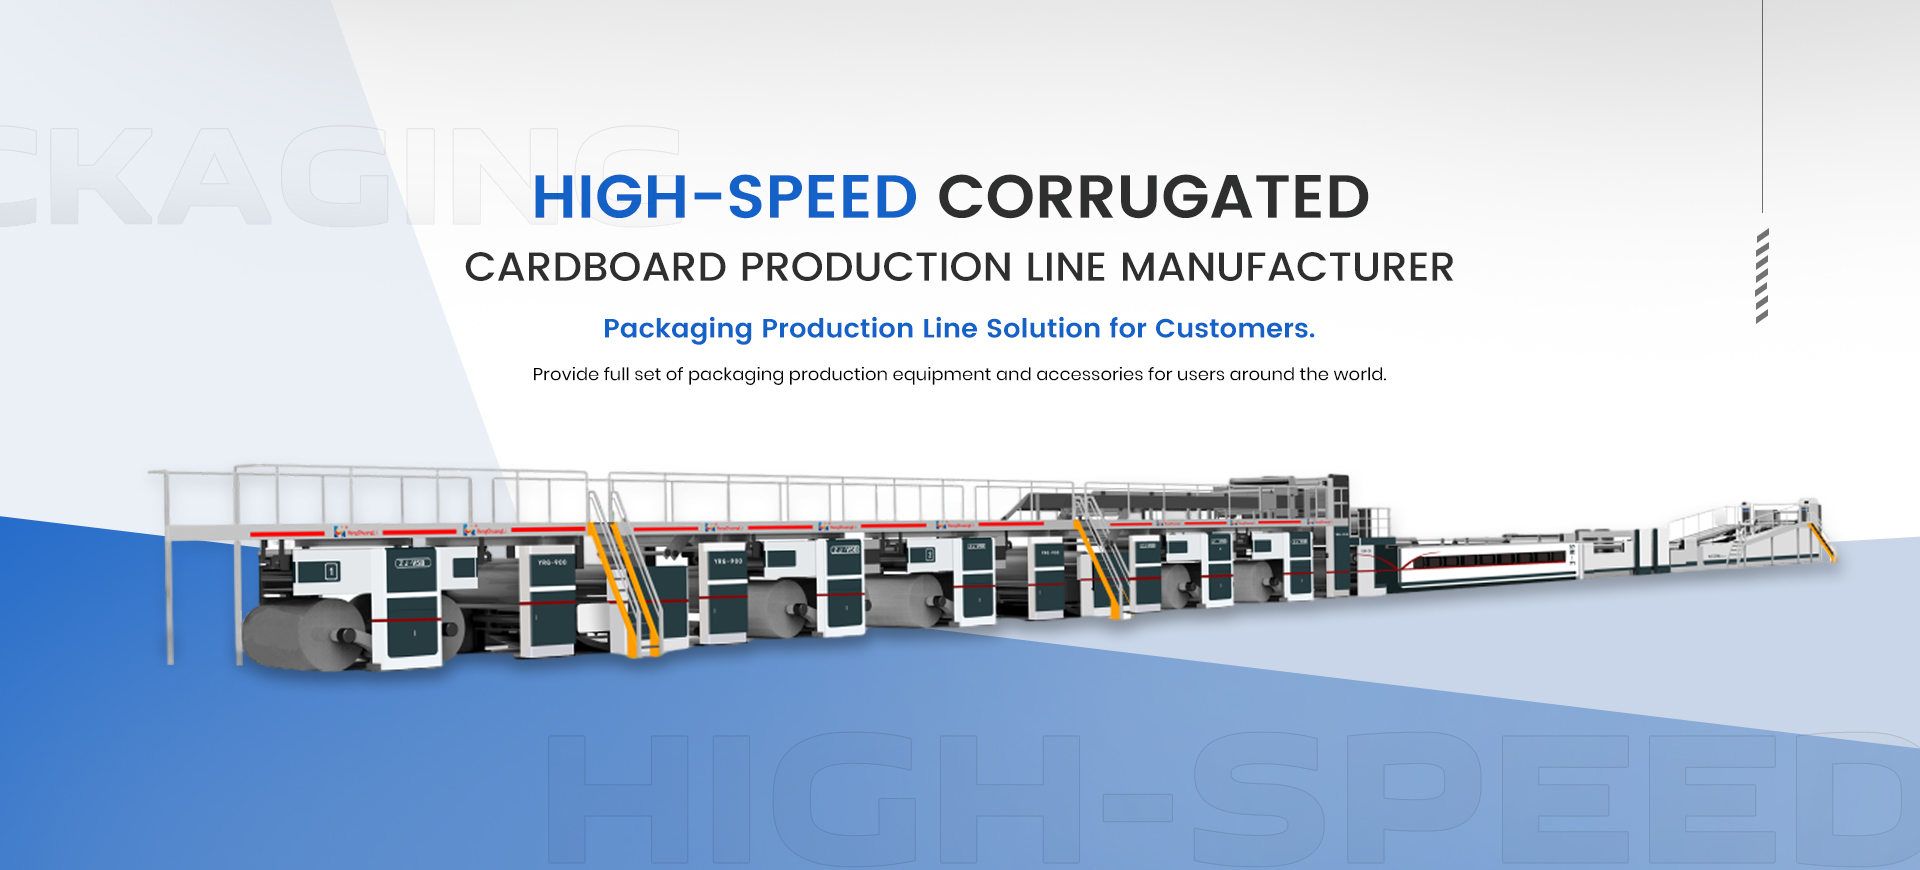 New Corrugated Board Production Line Equipment Unveiled